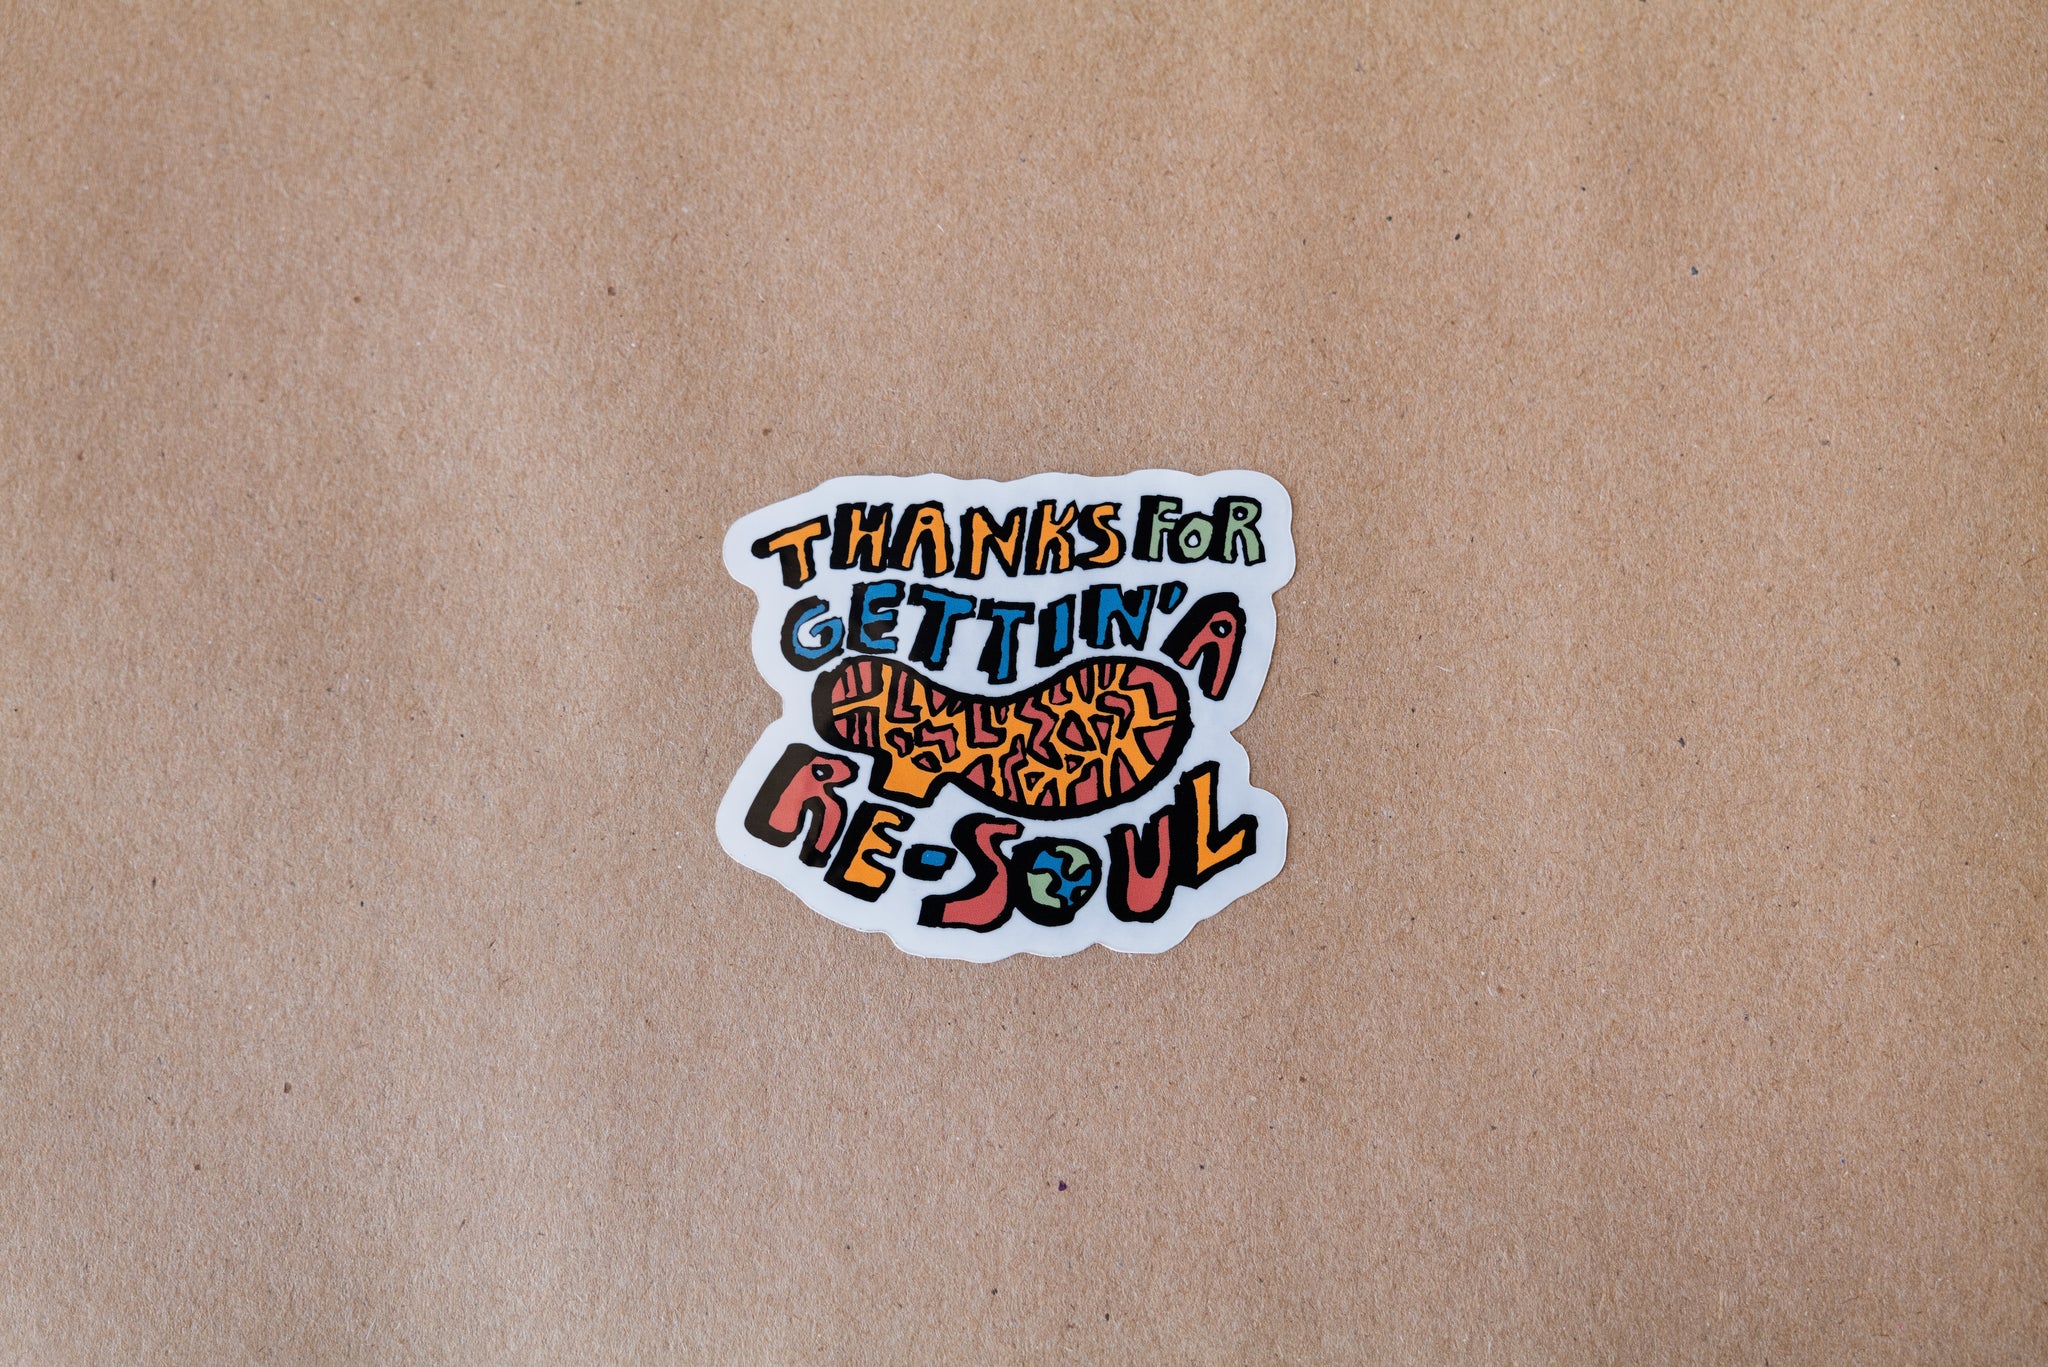 "Thanks for getting a Re-soul" sticker